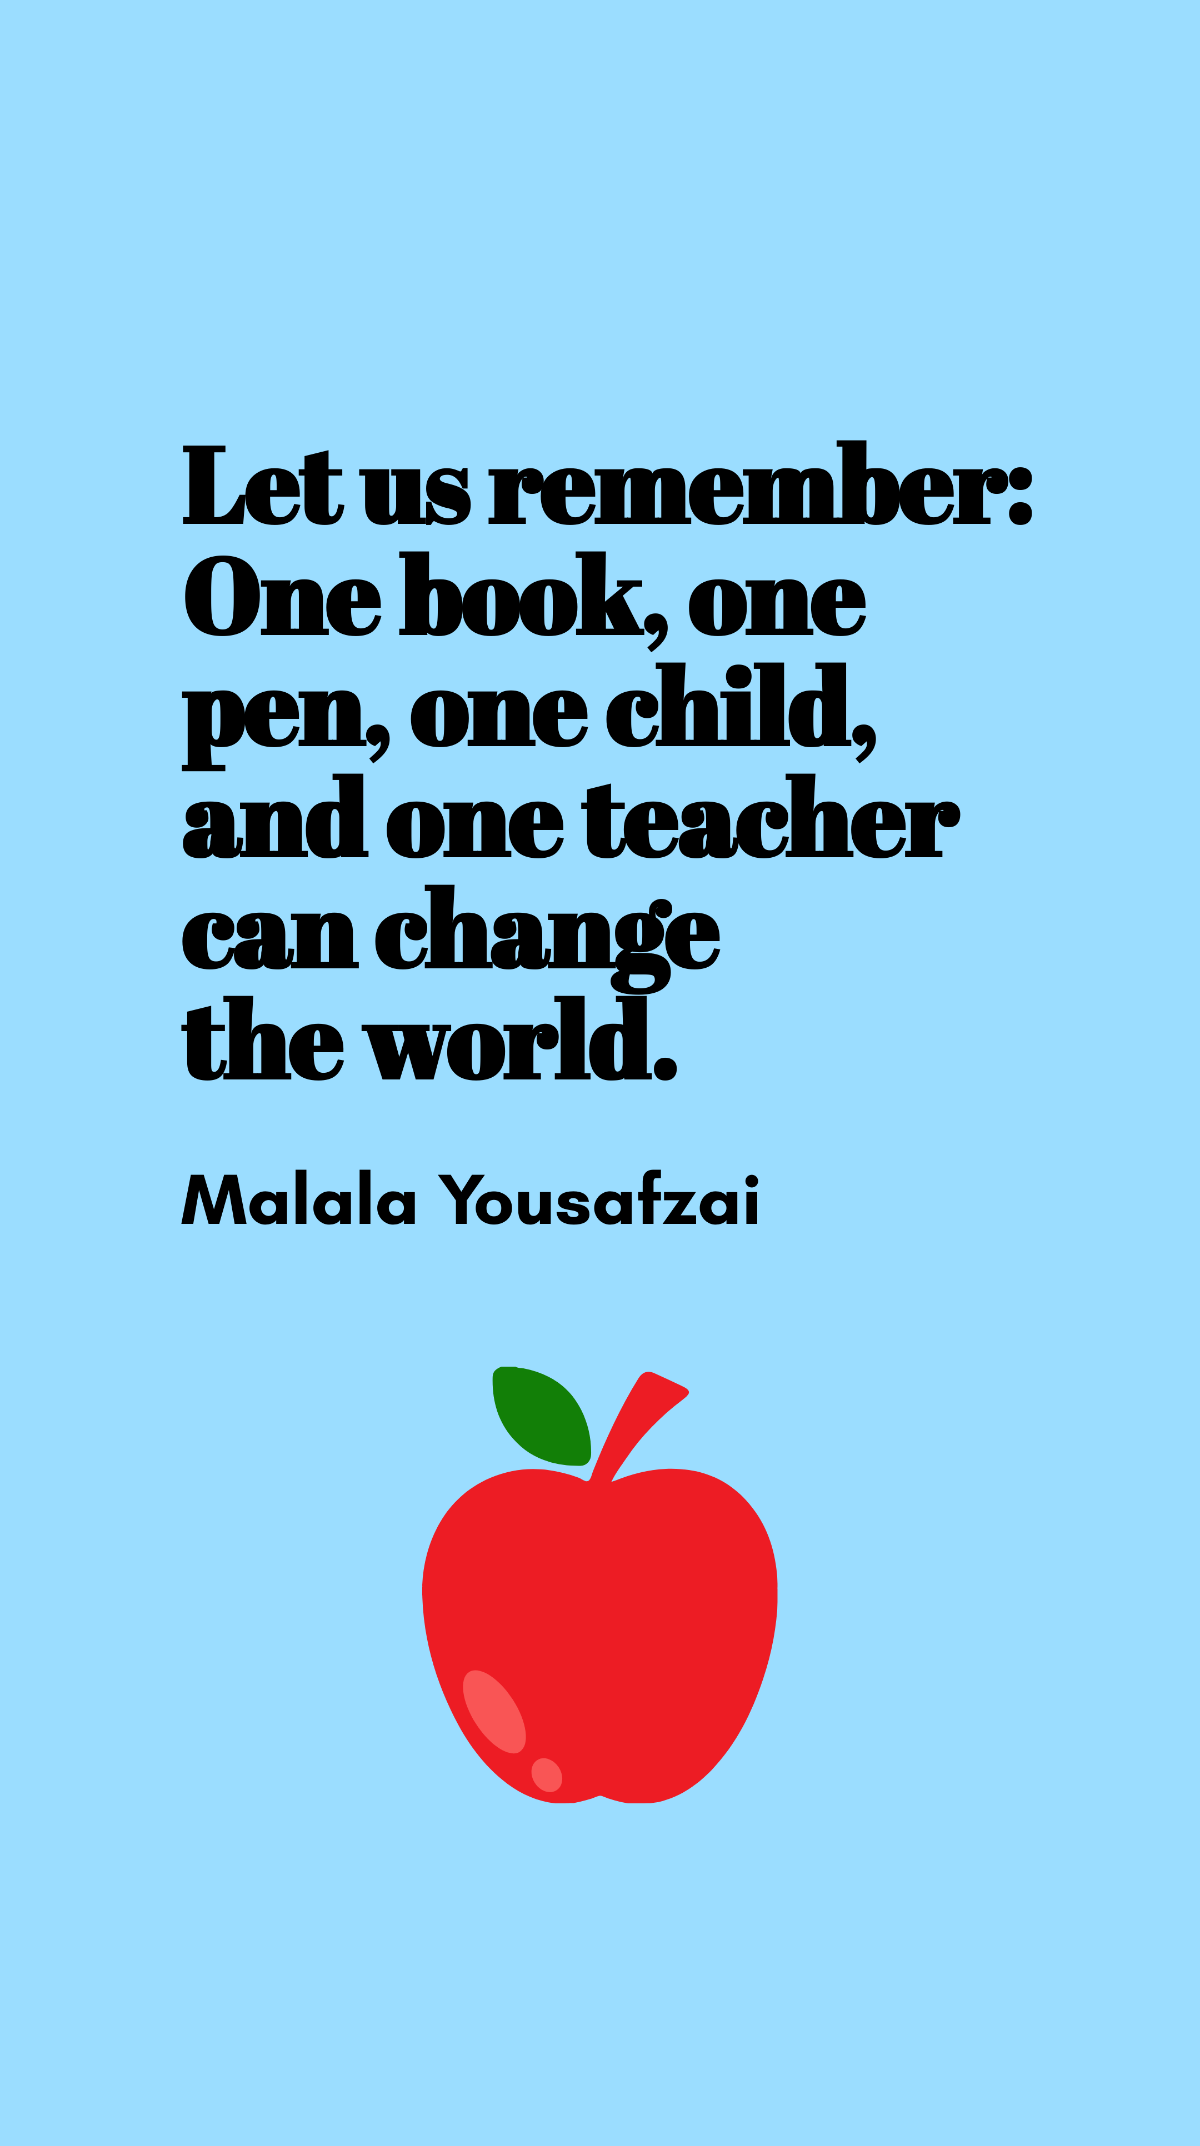 Free Malala Yousafzai - Let us remember: One book, one pen, one child, and one teacher can change the world. Template